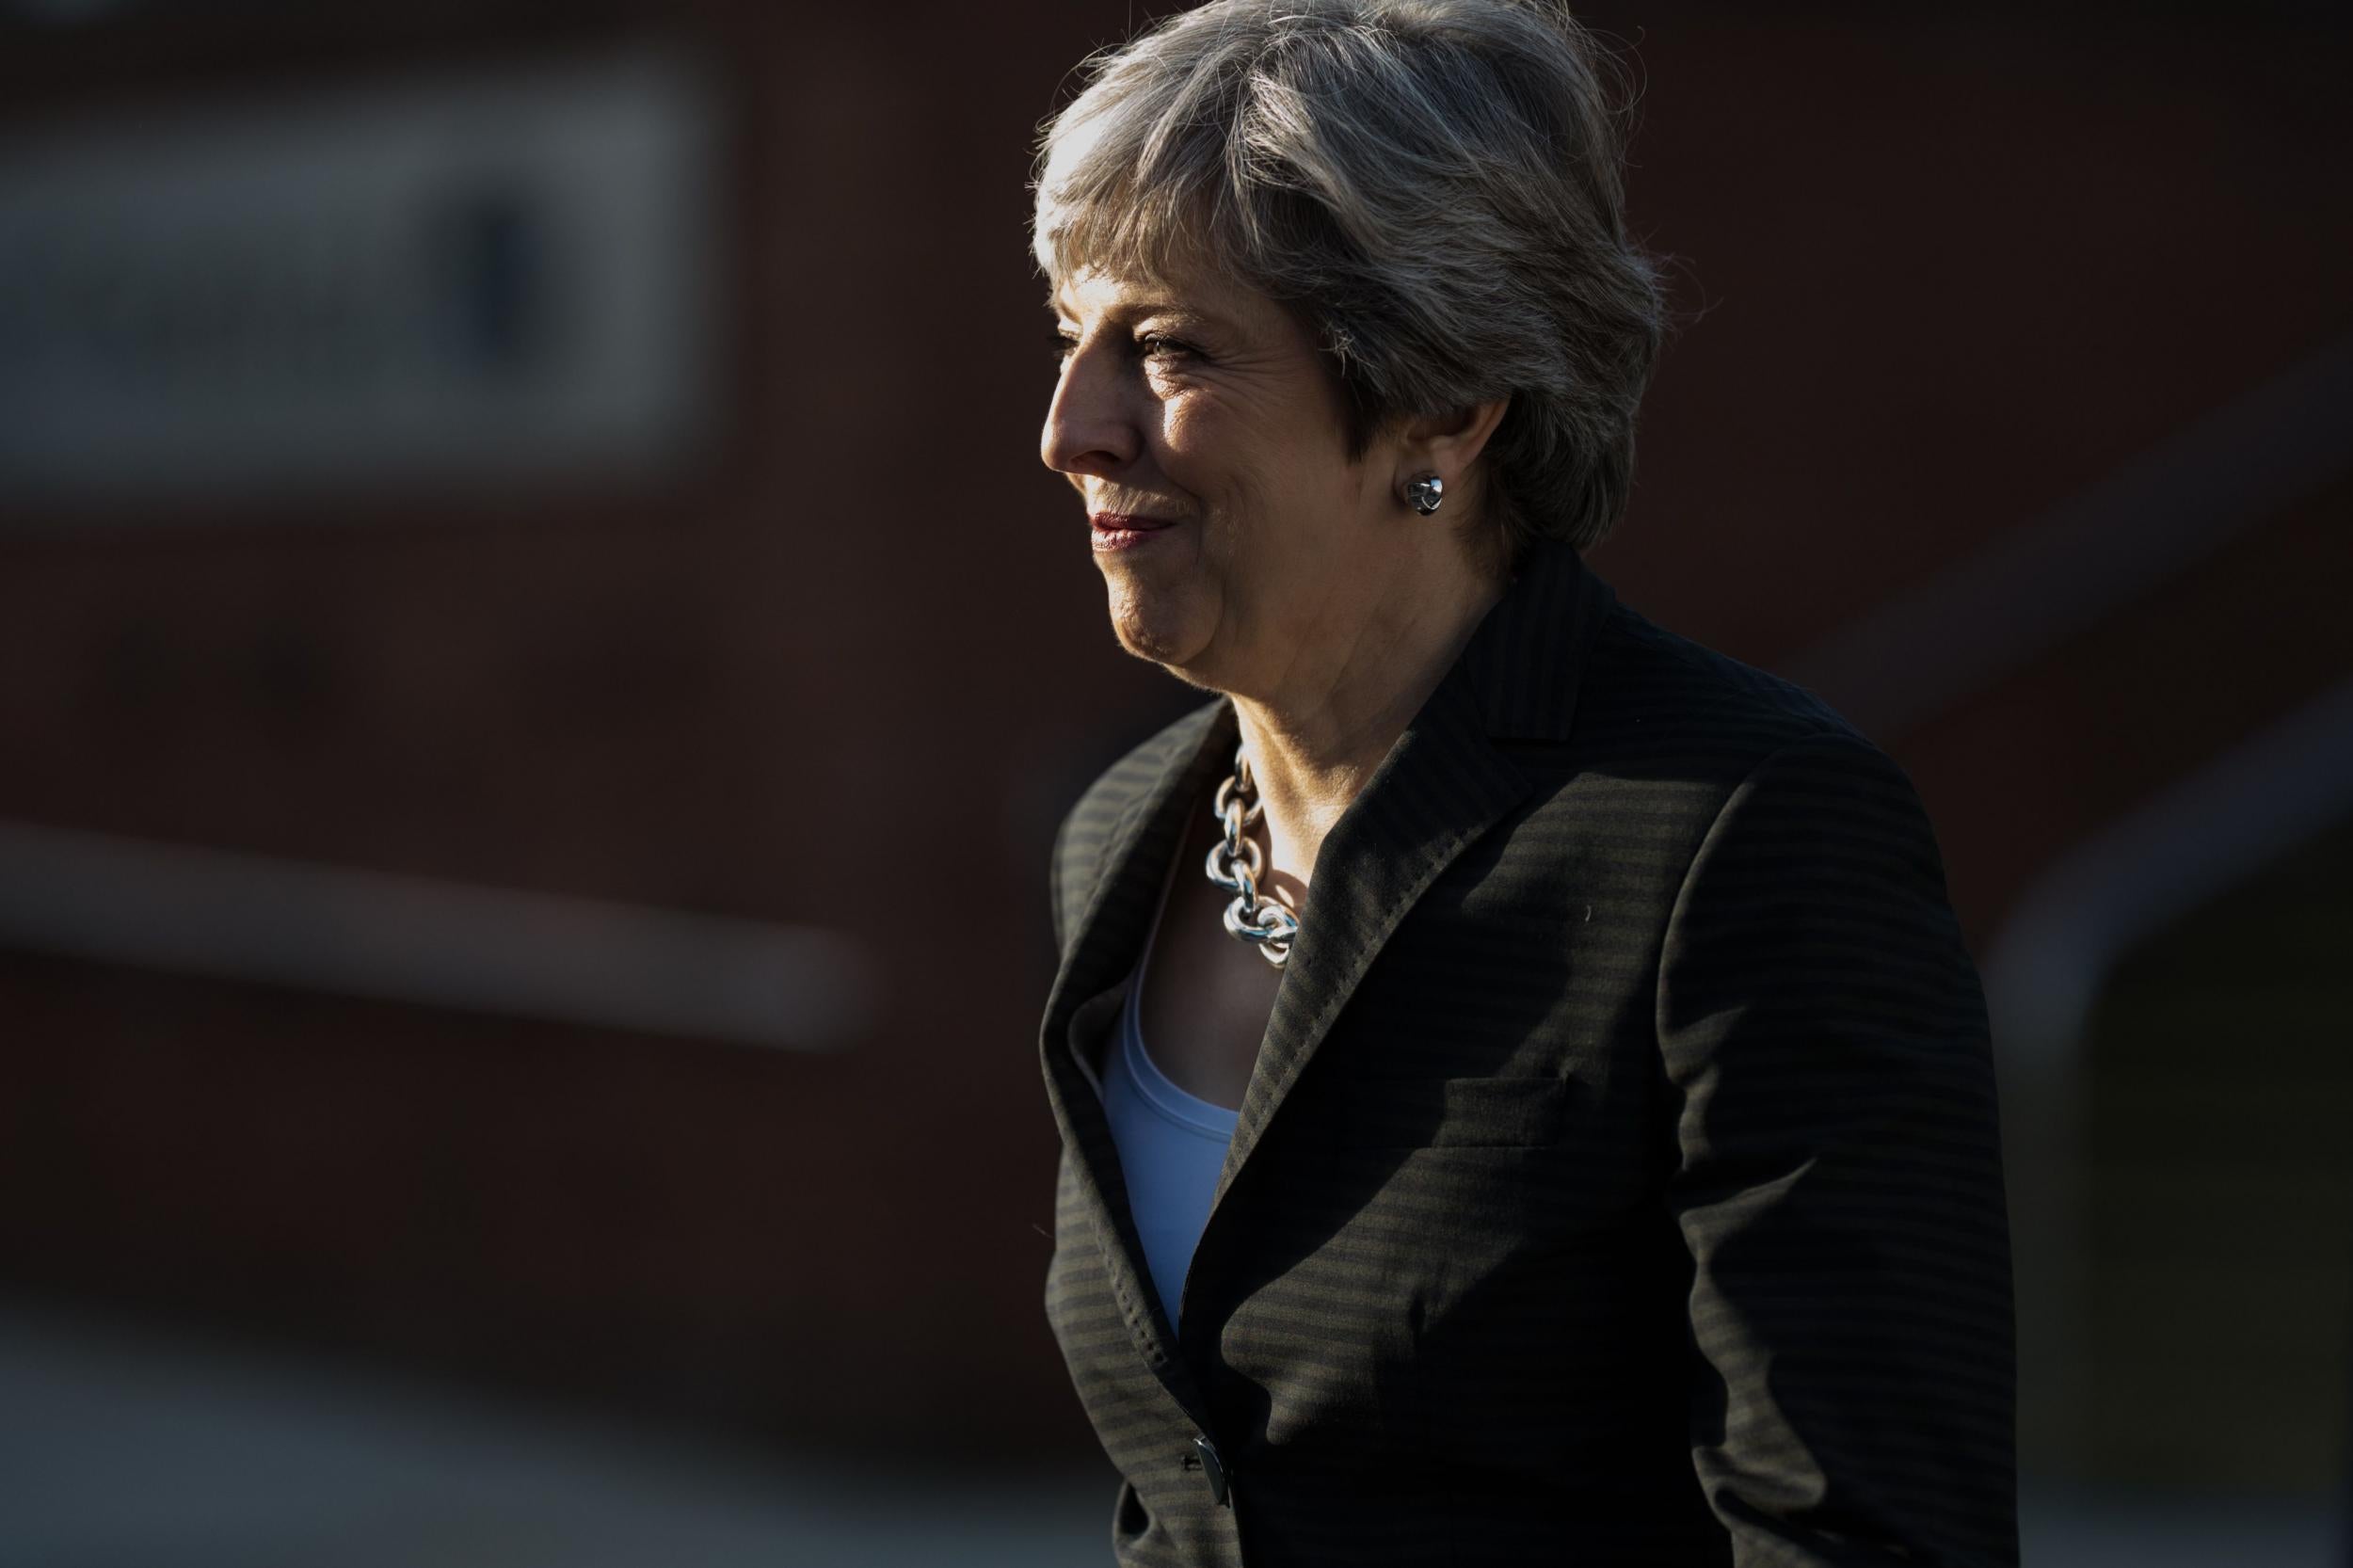 Theresa May will make a surprise visit to Brussels today, to try to breathe new life into the talks